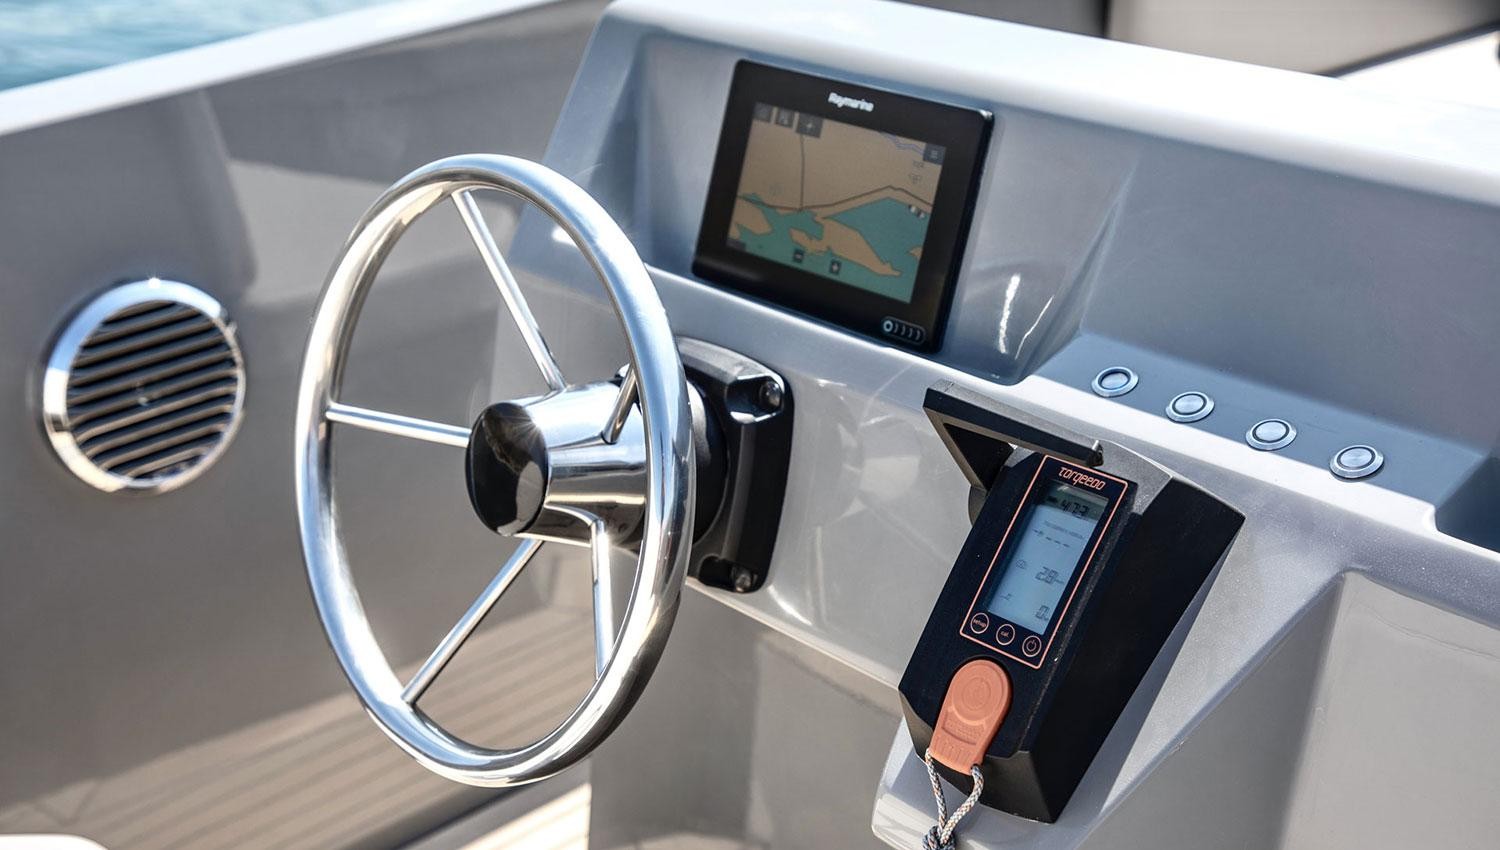 The Mana 23 is powered purely electrically by Torqeedo systems. Solar panels are installed on the sun deck. (Credit: RAND Boats)